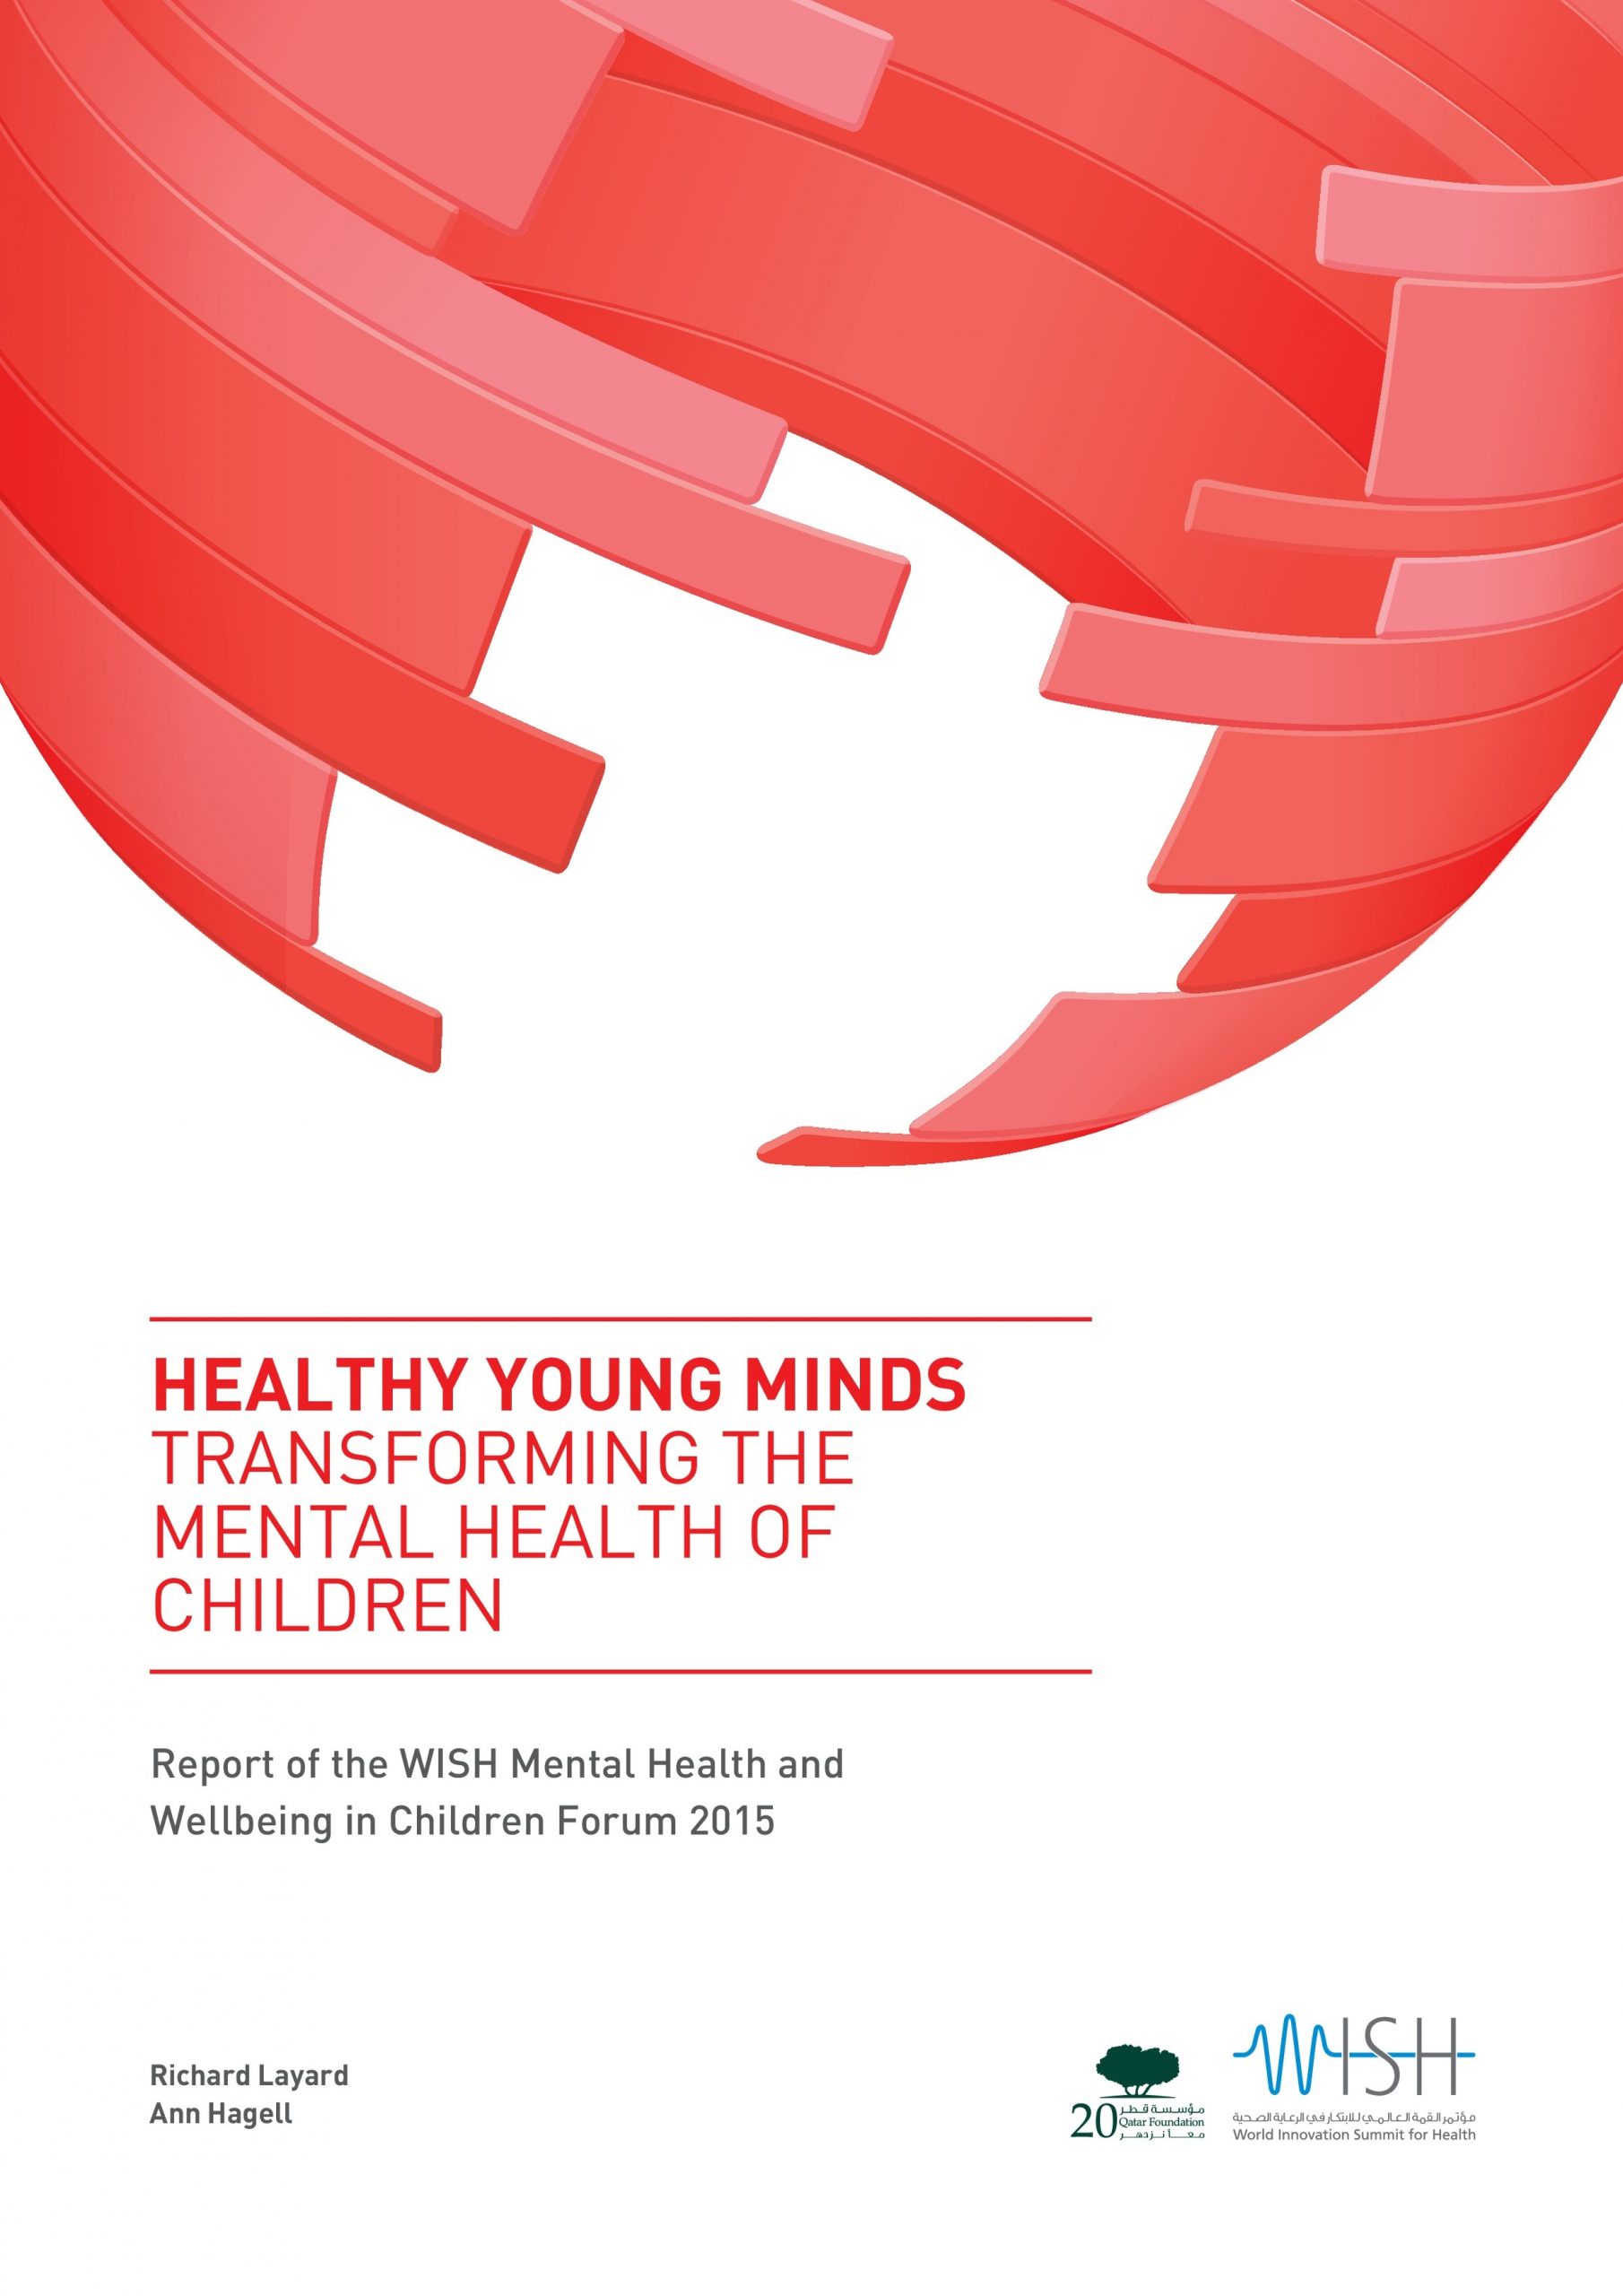 Healthy Young Minds: Transforming the Mental Health of Children